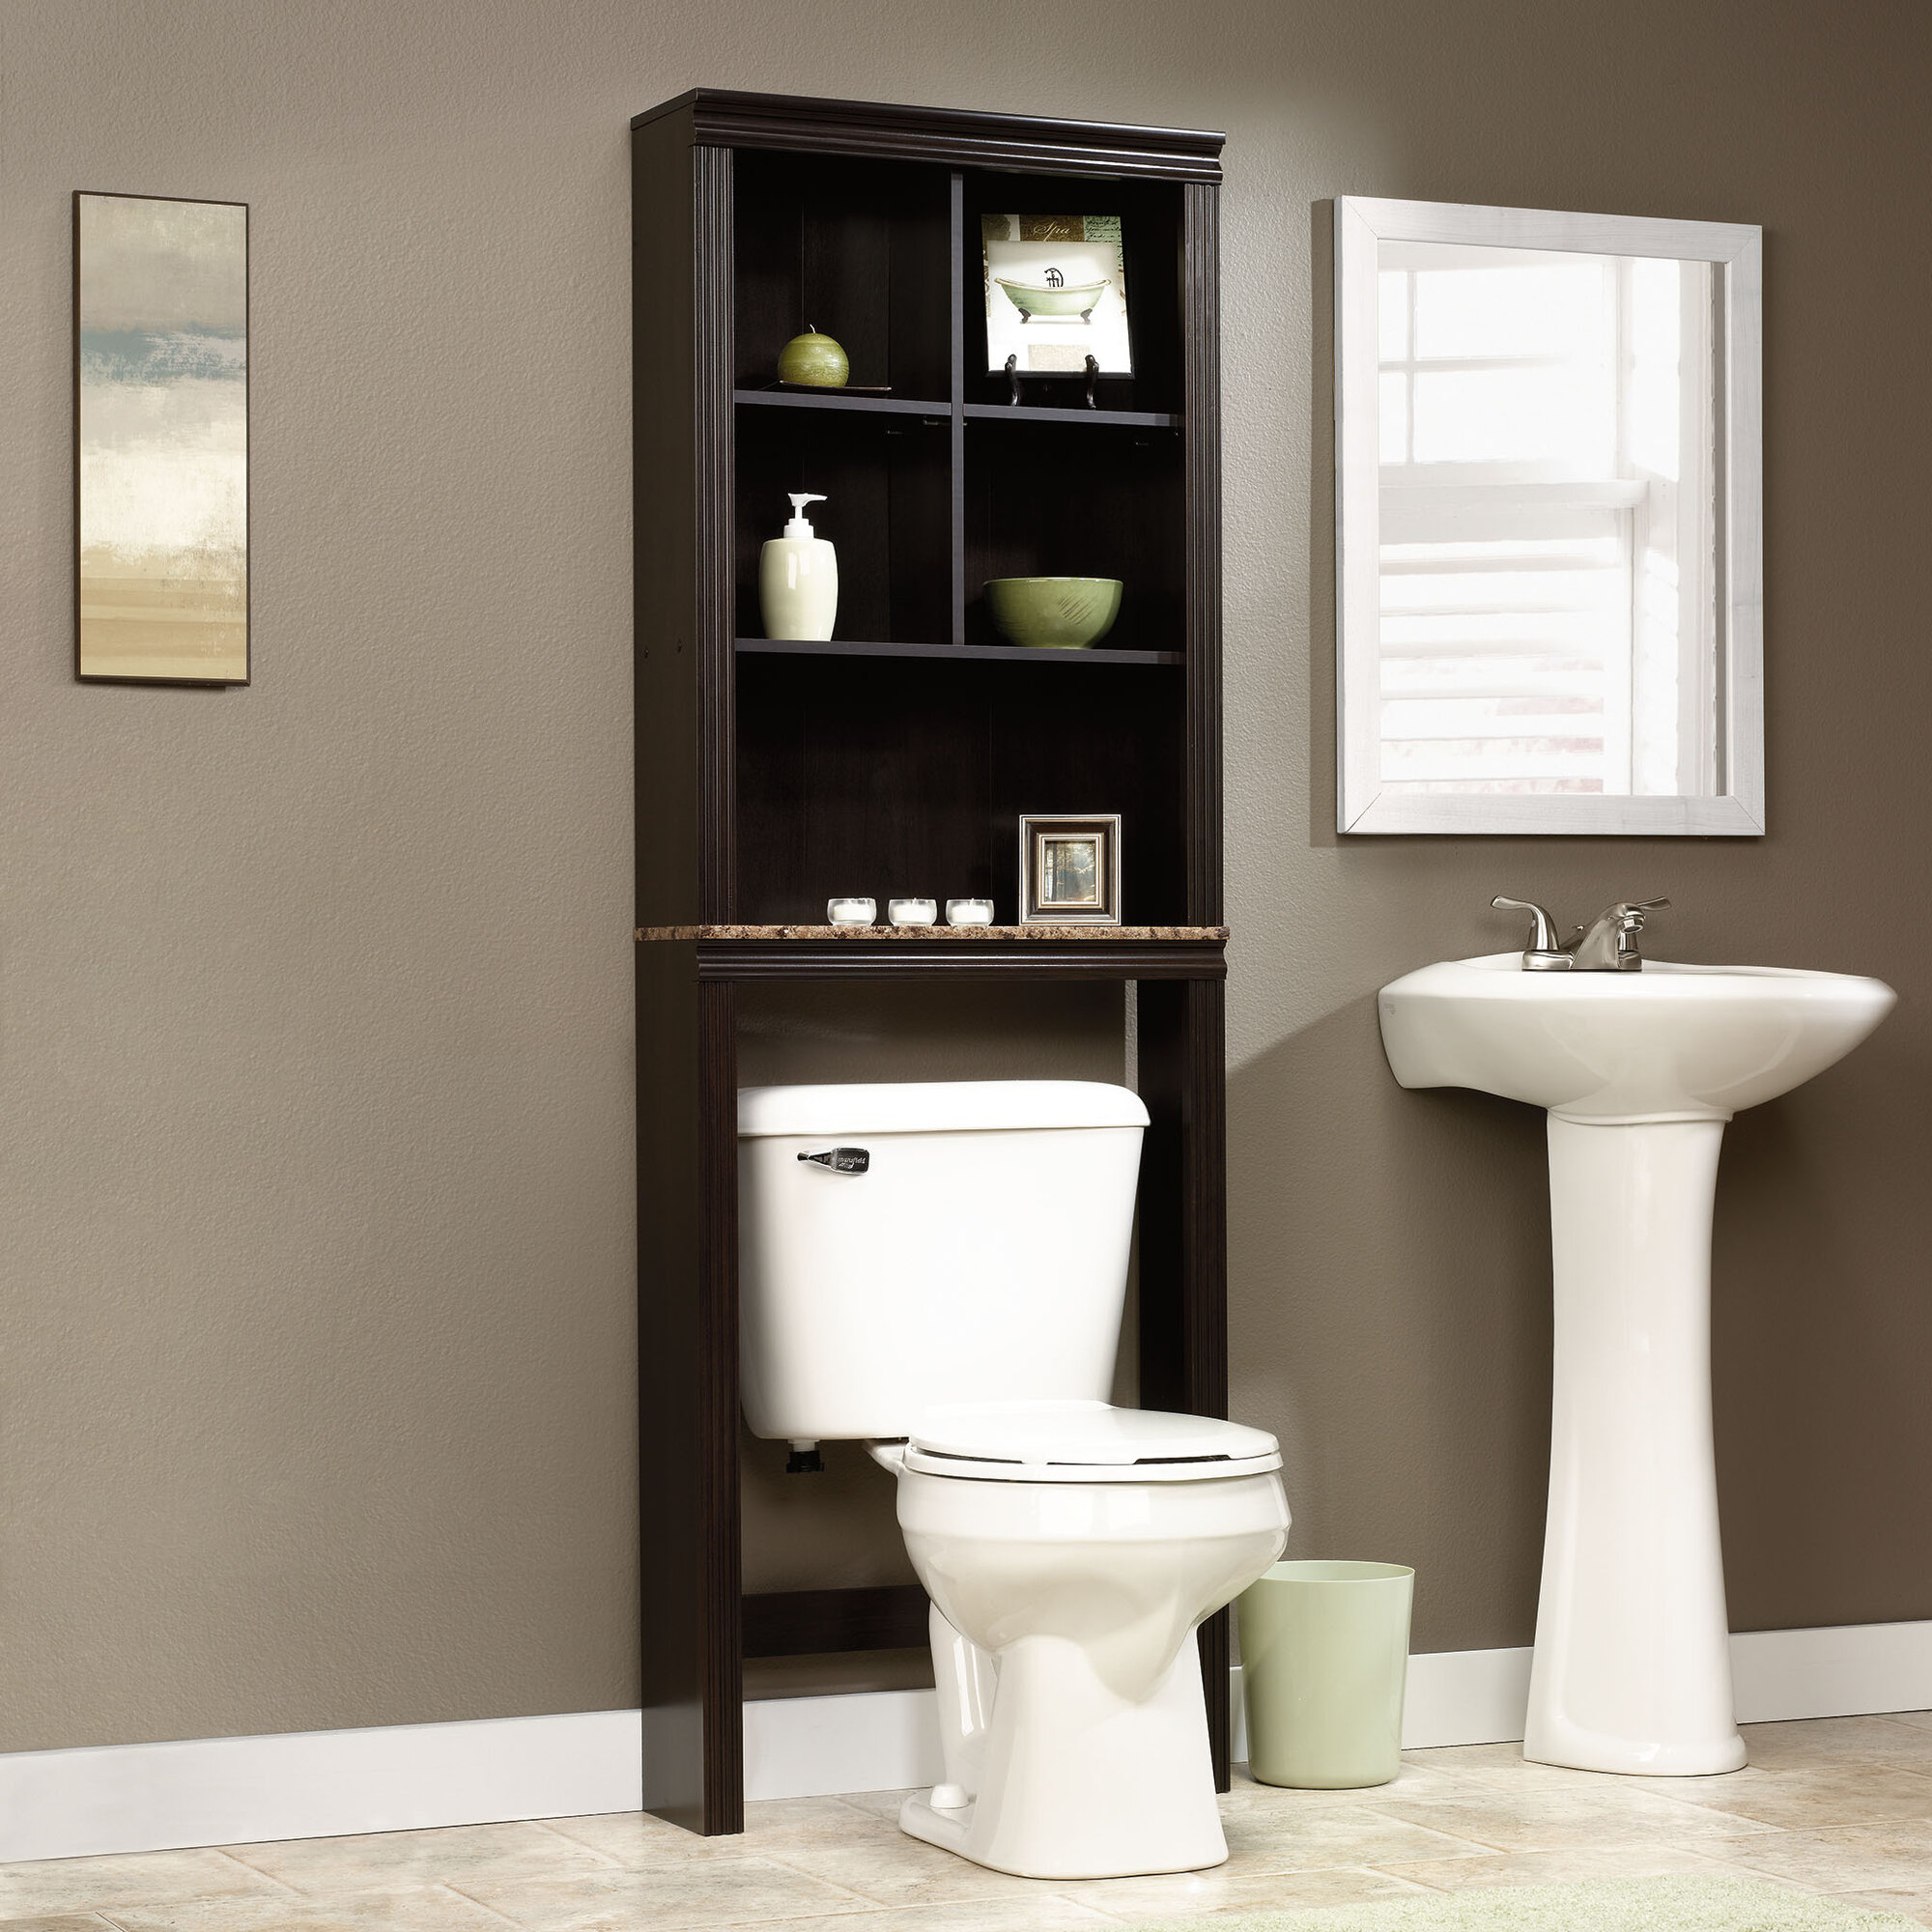 Over The Toilet Storage Bathroom Space Saver Cubby ...